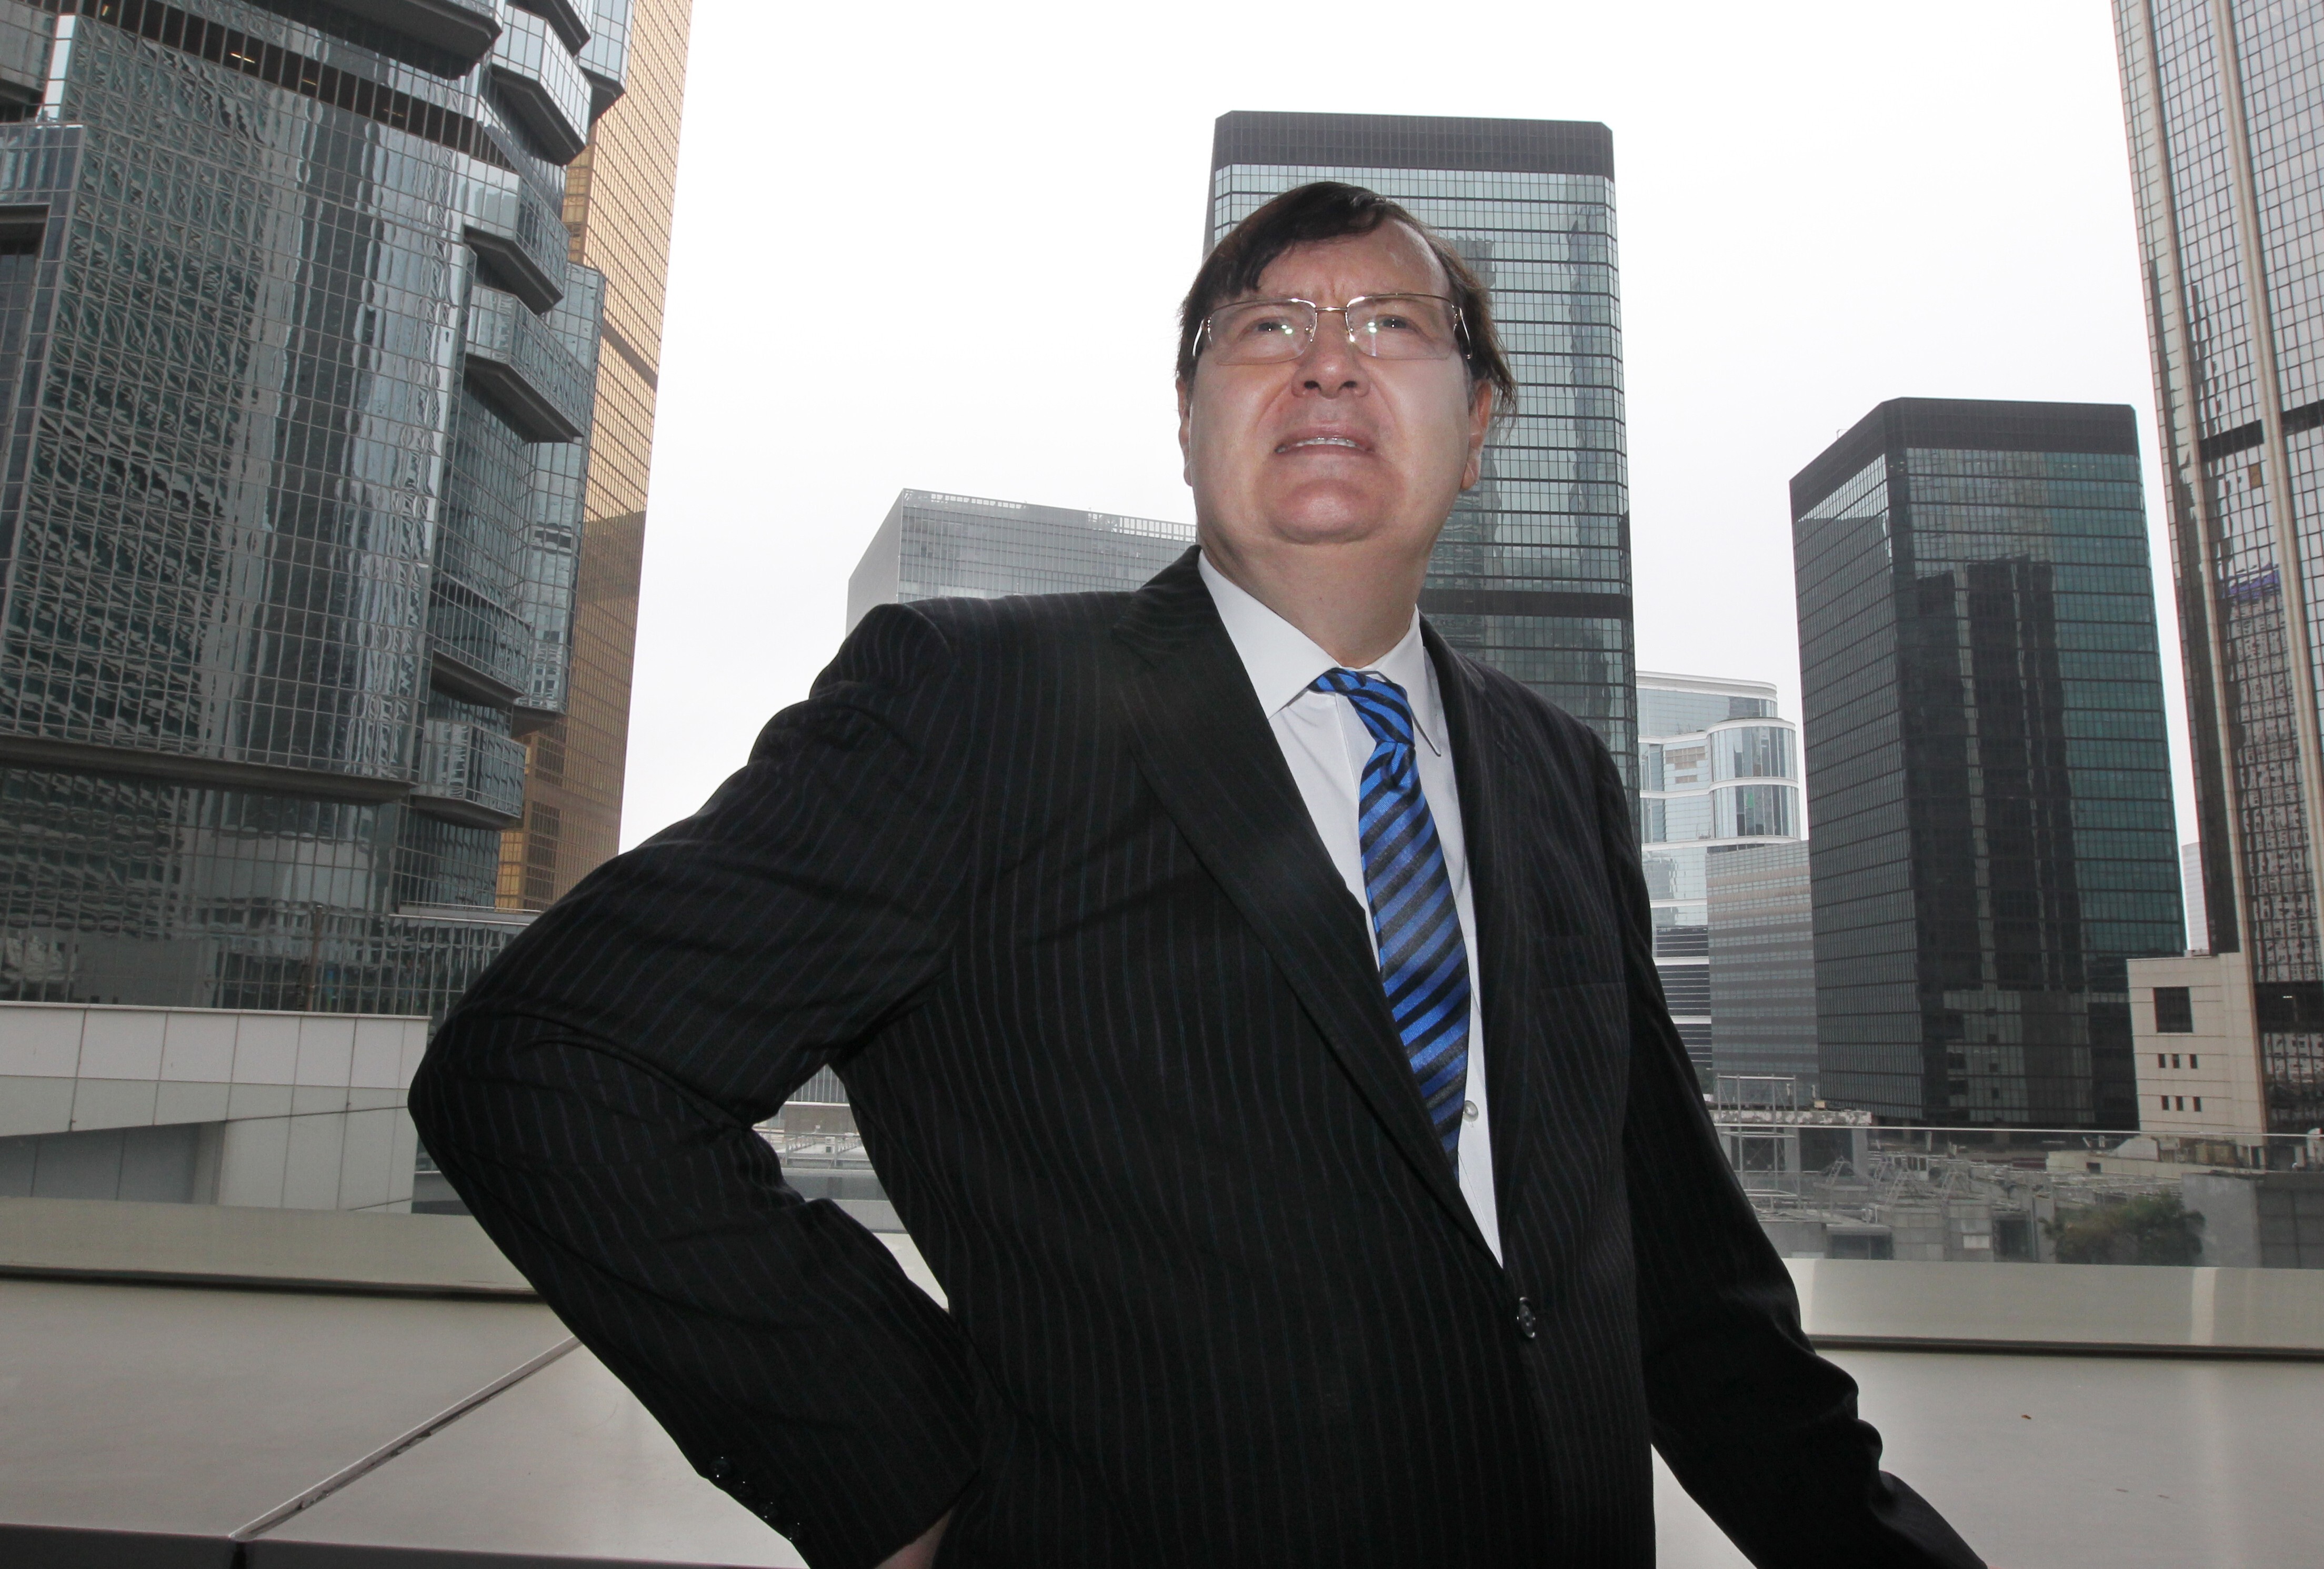 Gerard McCoy took on some of the city’s most challenging cases in both criminal and civil court in a career that spanned 40 years. Photo: SCMP